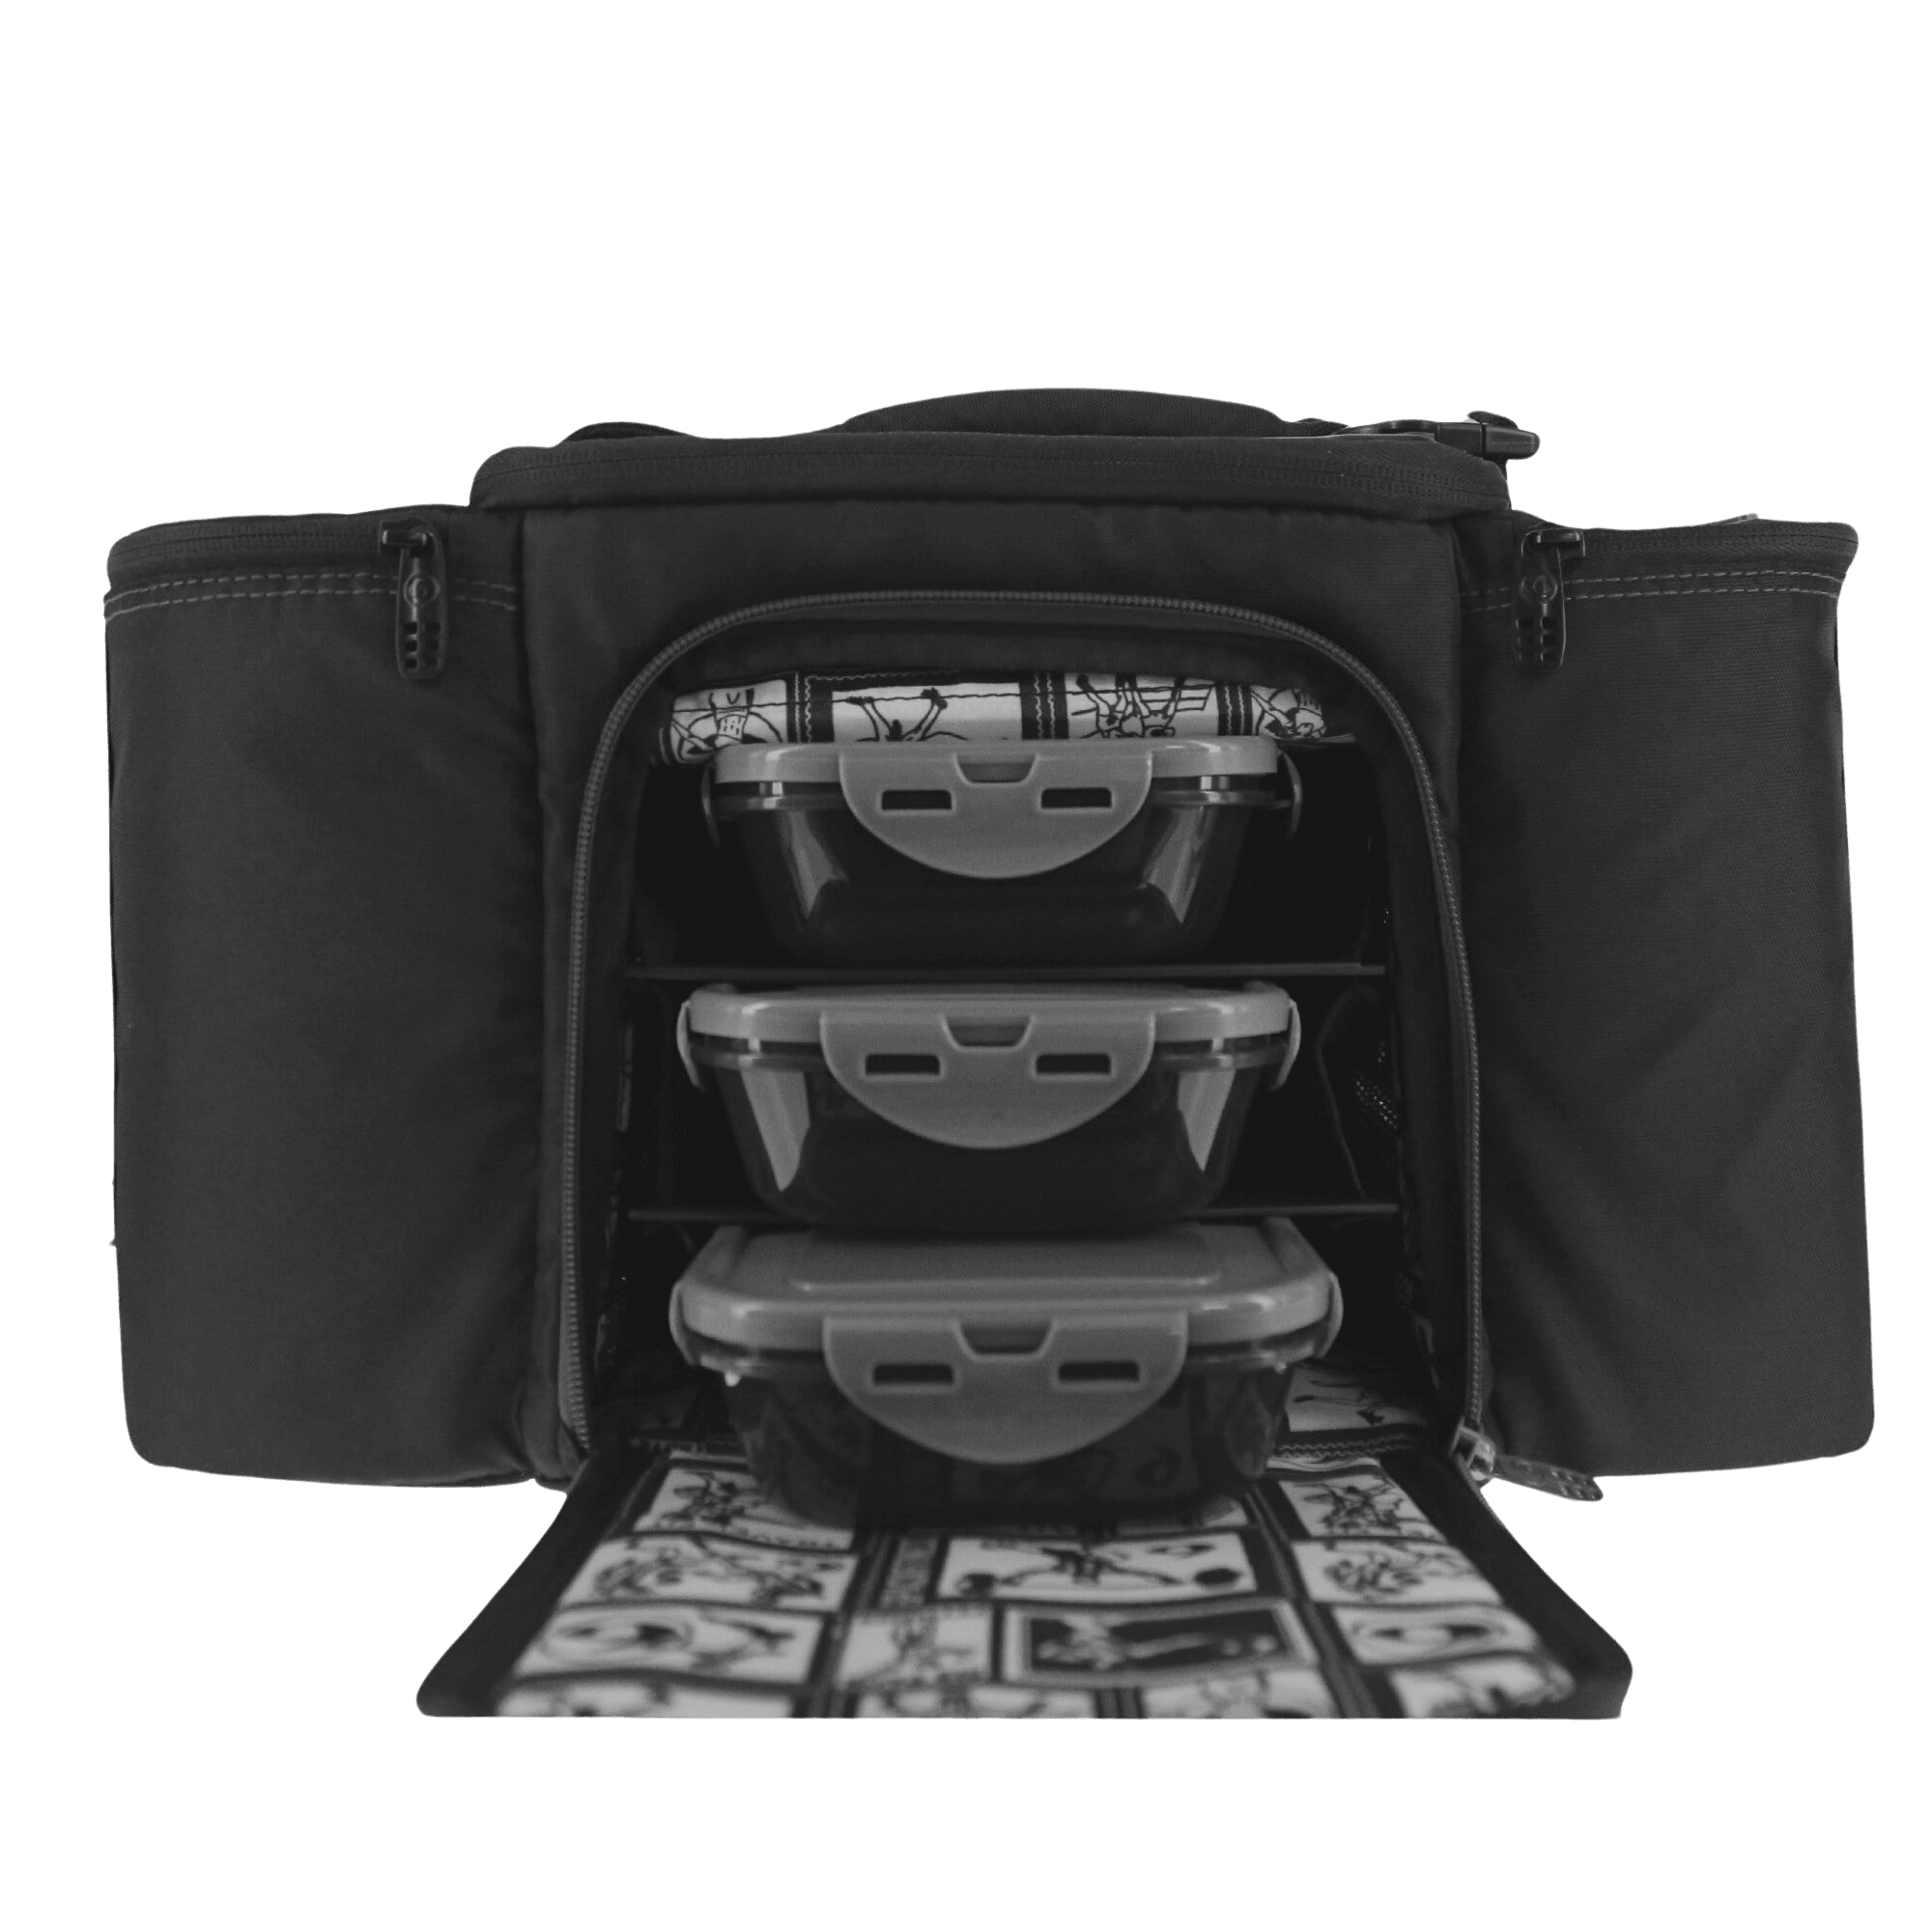 Innovator 300 Meal Prep Management Tote 4 - Meal (Black/Grey) - sixpackbags